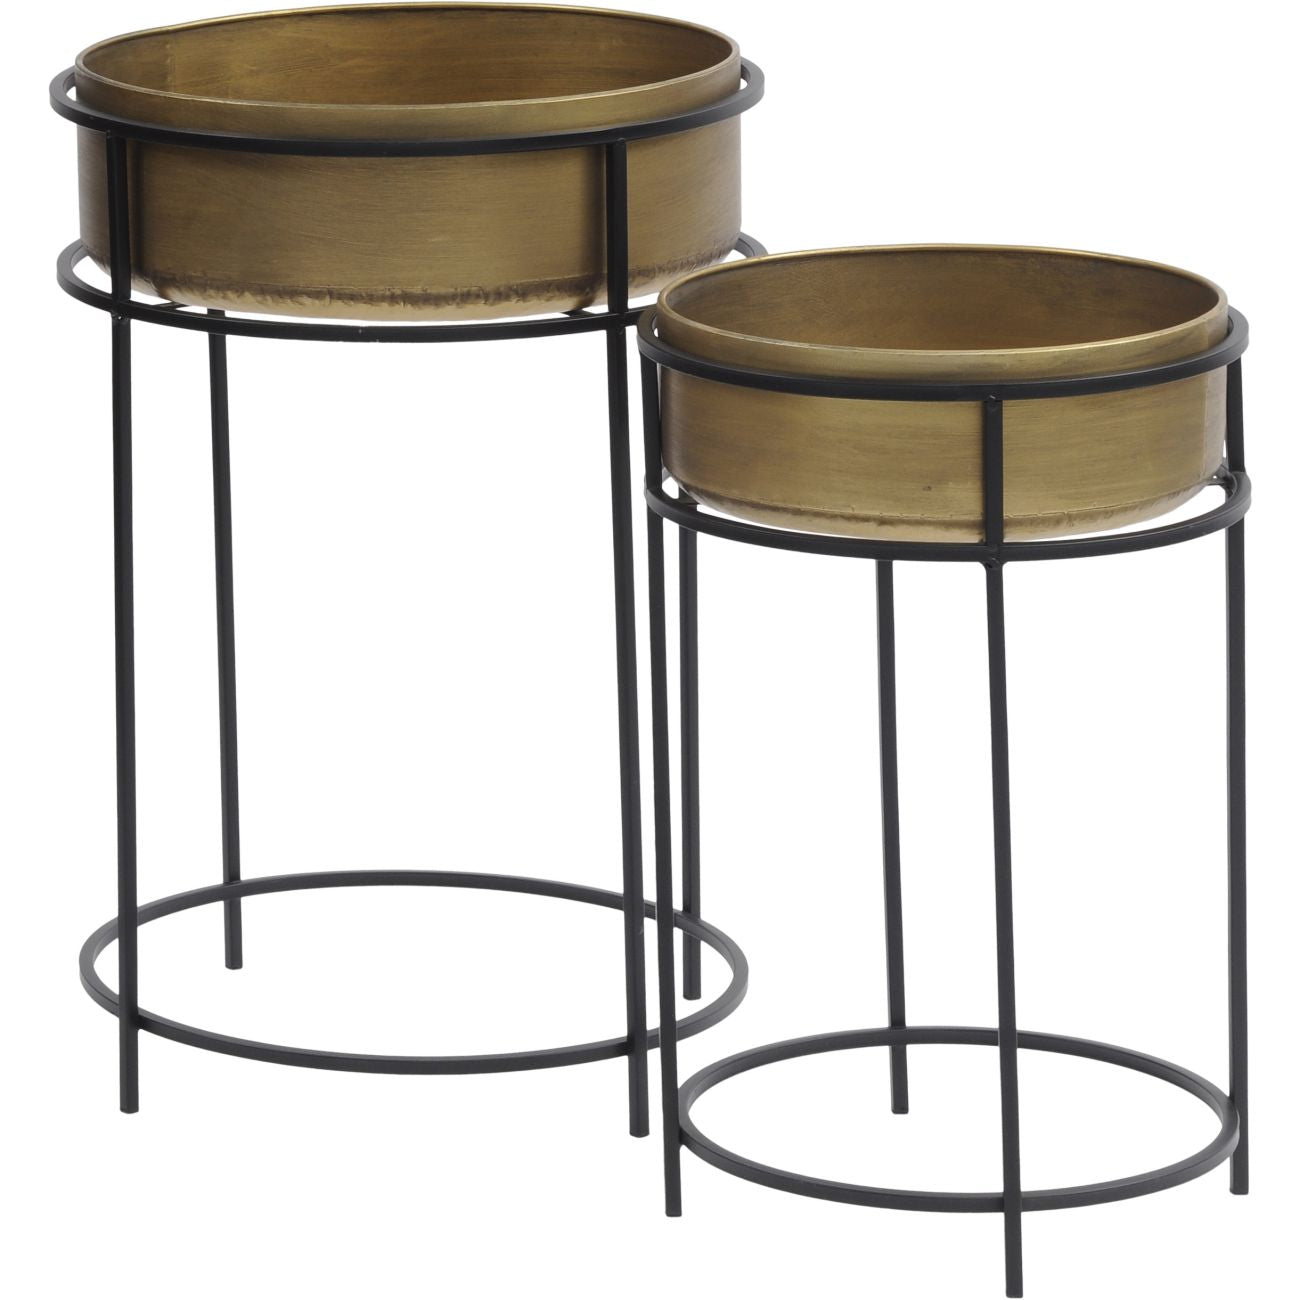 Gold Planter with Tall Black Metal Stand, Set of 2